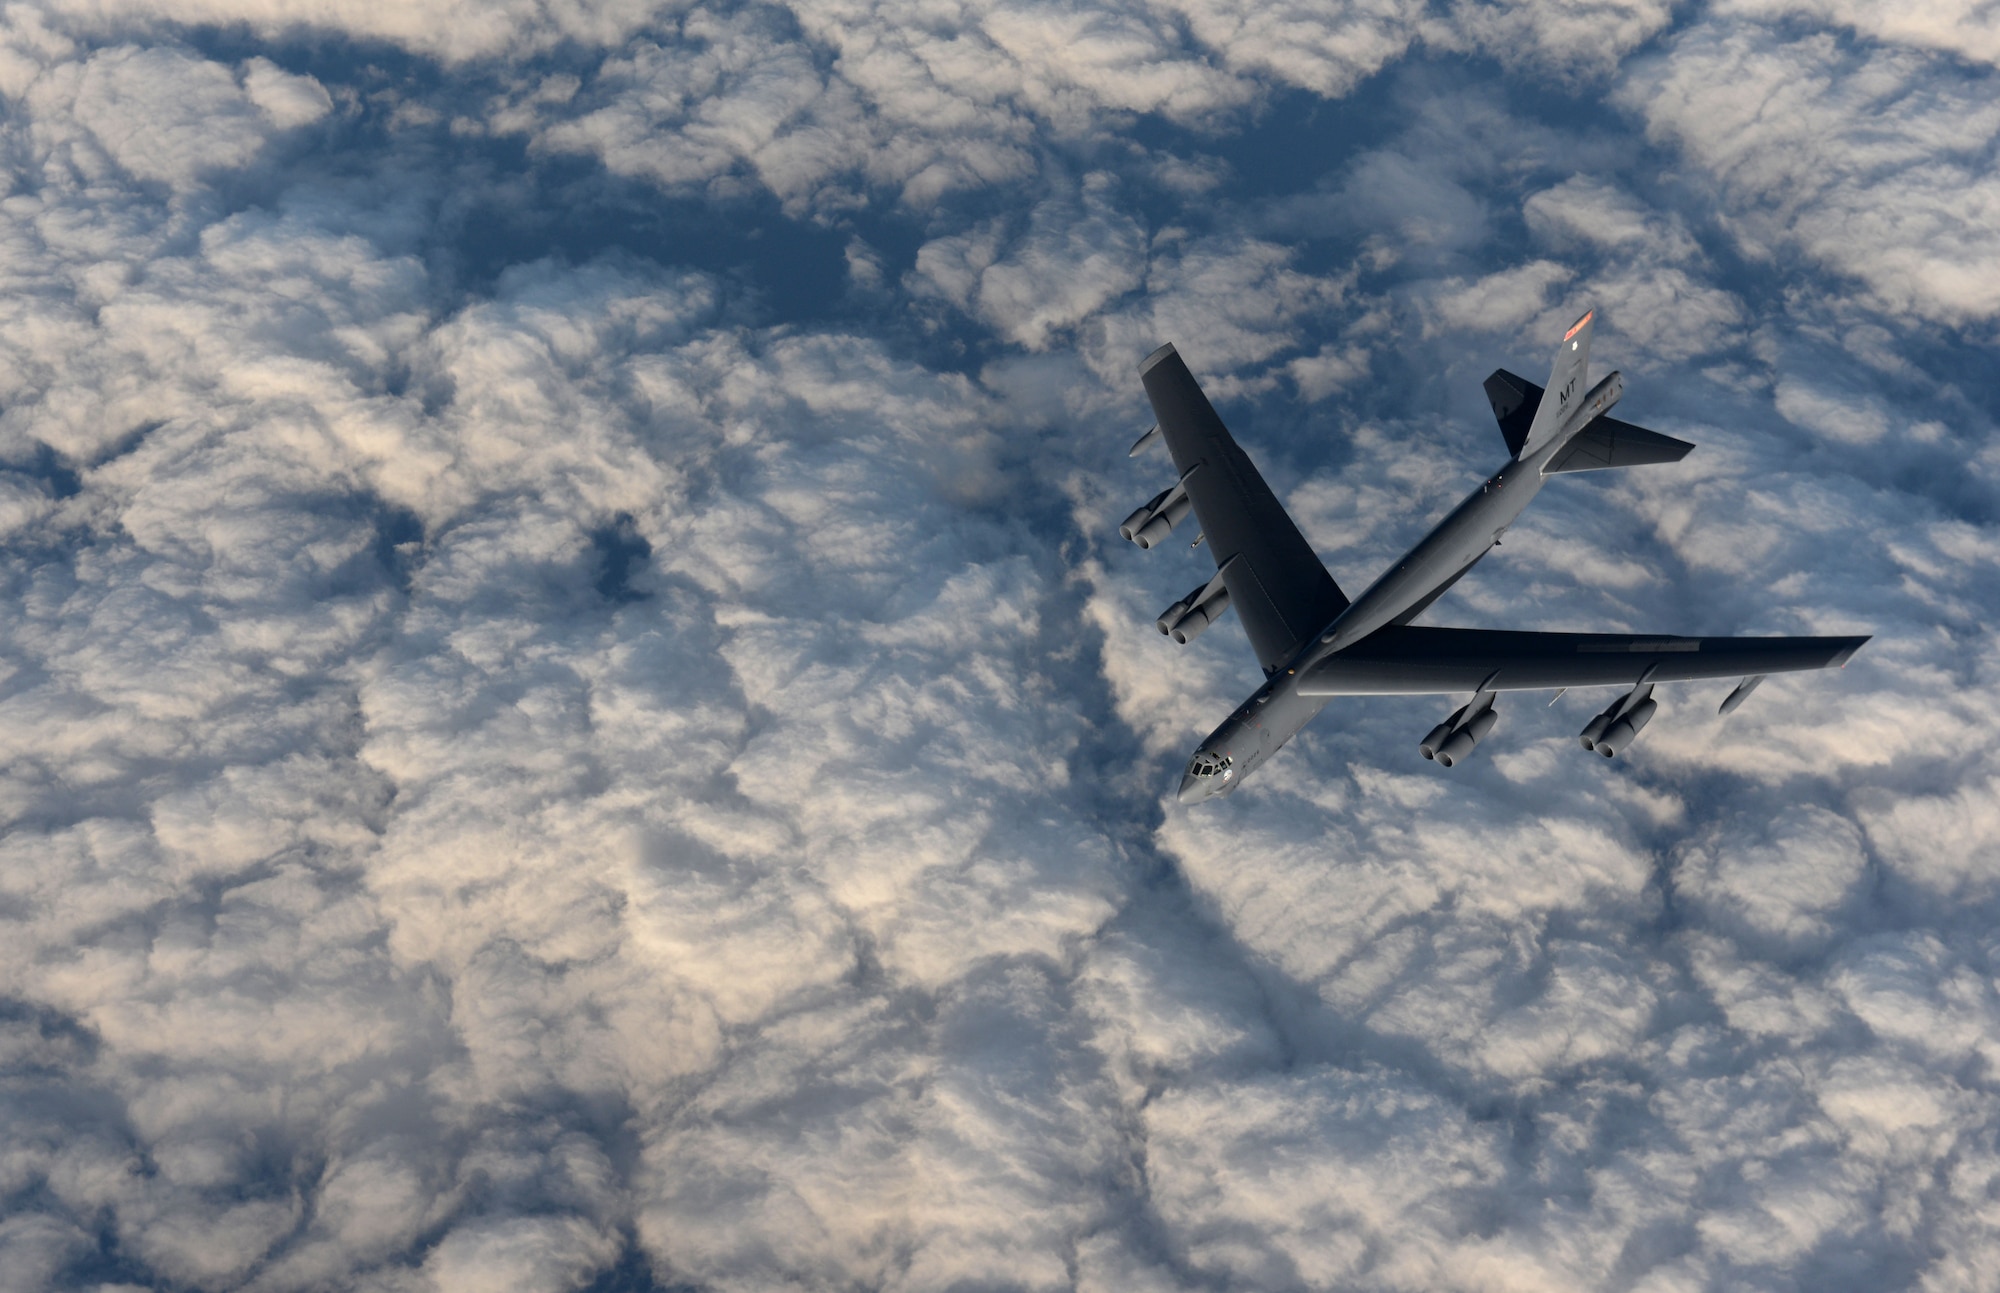 A KC-135 Stratotanker from RAF Mildenhall, England, refuels a B-52 Stratofortress from Minot Air Force Base, North Dakota, in support of Operation Polar Roar over Scotland, Aug. 1, 2016. Polar Roar is a U.S. Strategic Command operation designed to strengthen bomber crews' interoperability and demonstrate ability for the U.S. bomber force to provide flexible and vigilant long-range global-strike capability. (U.S. Air Force photo by Staff Sgt. Kate Thornton)